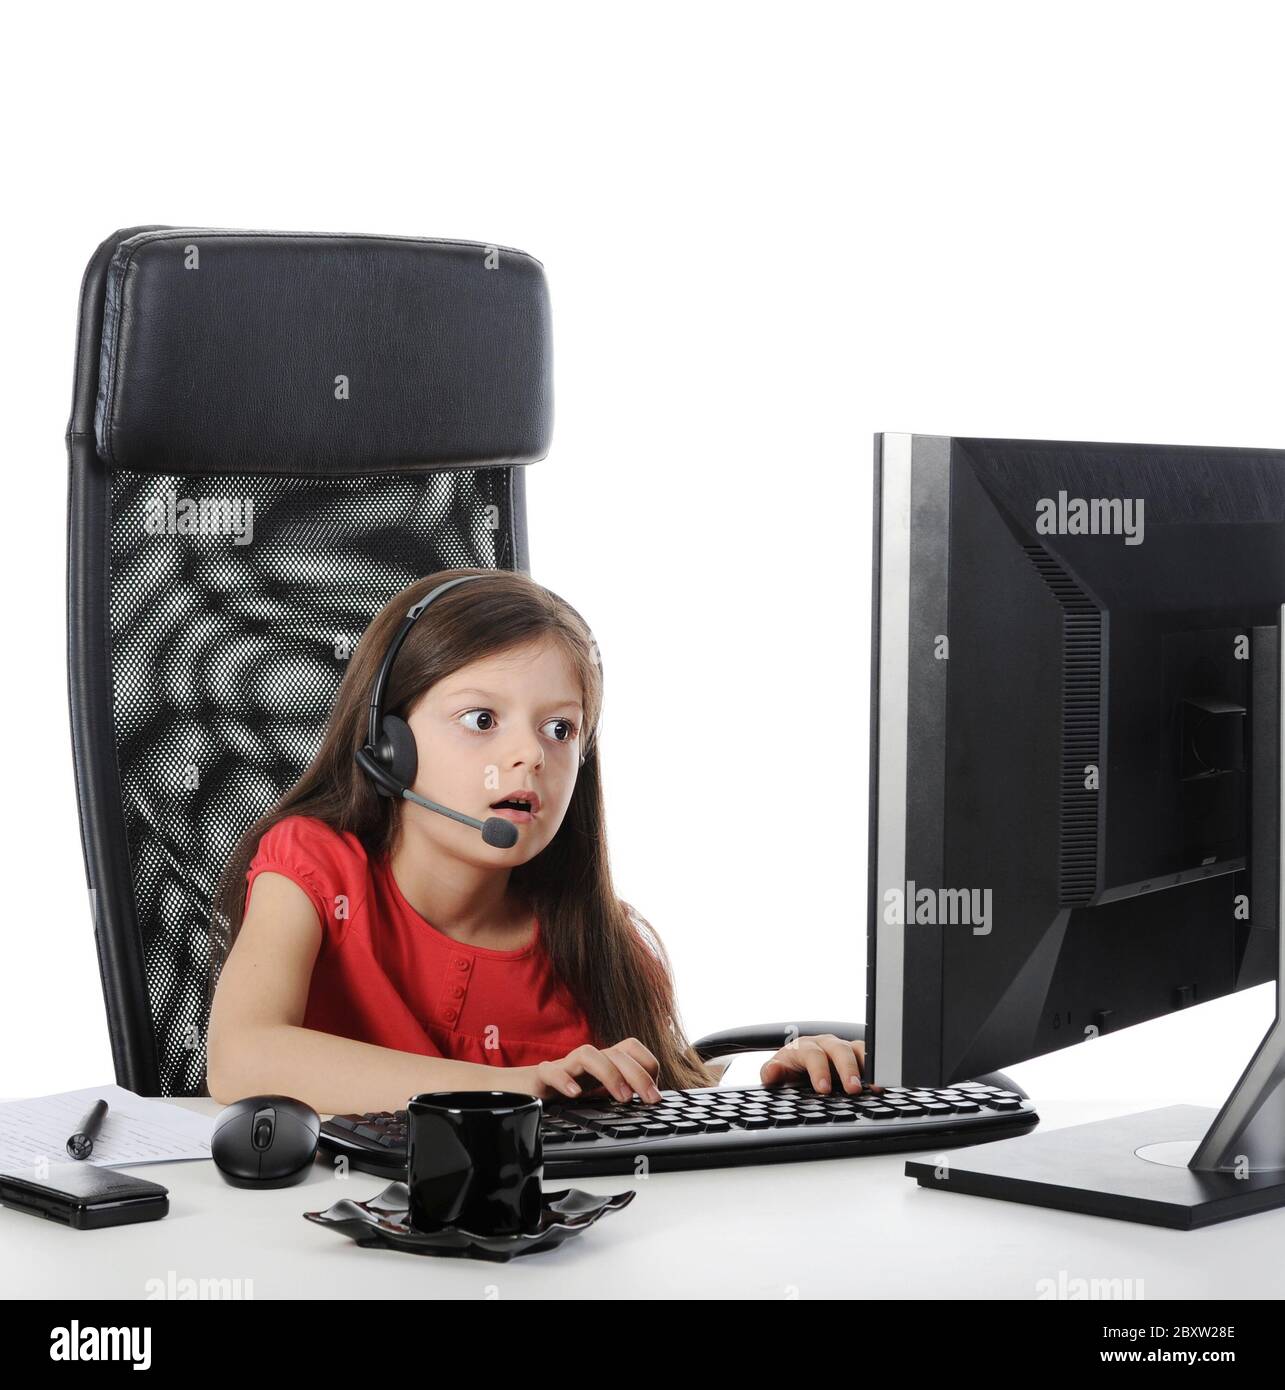 girl with astonishment looks in the computer Stock Photo